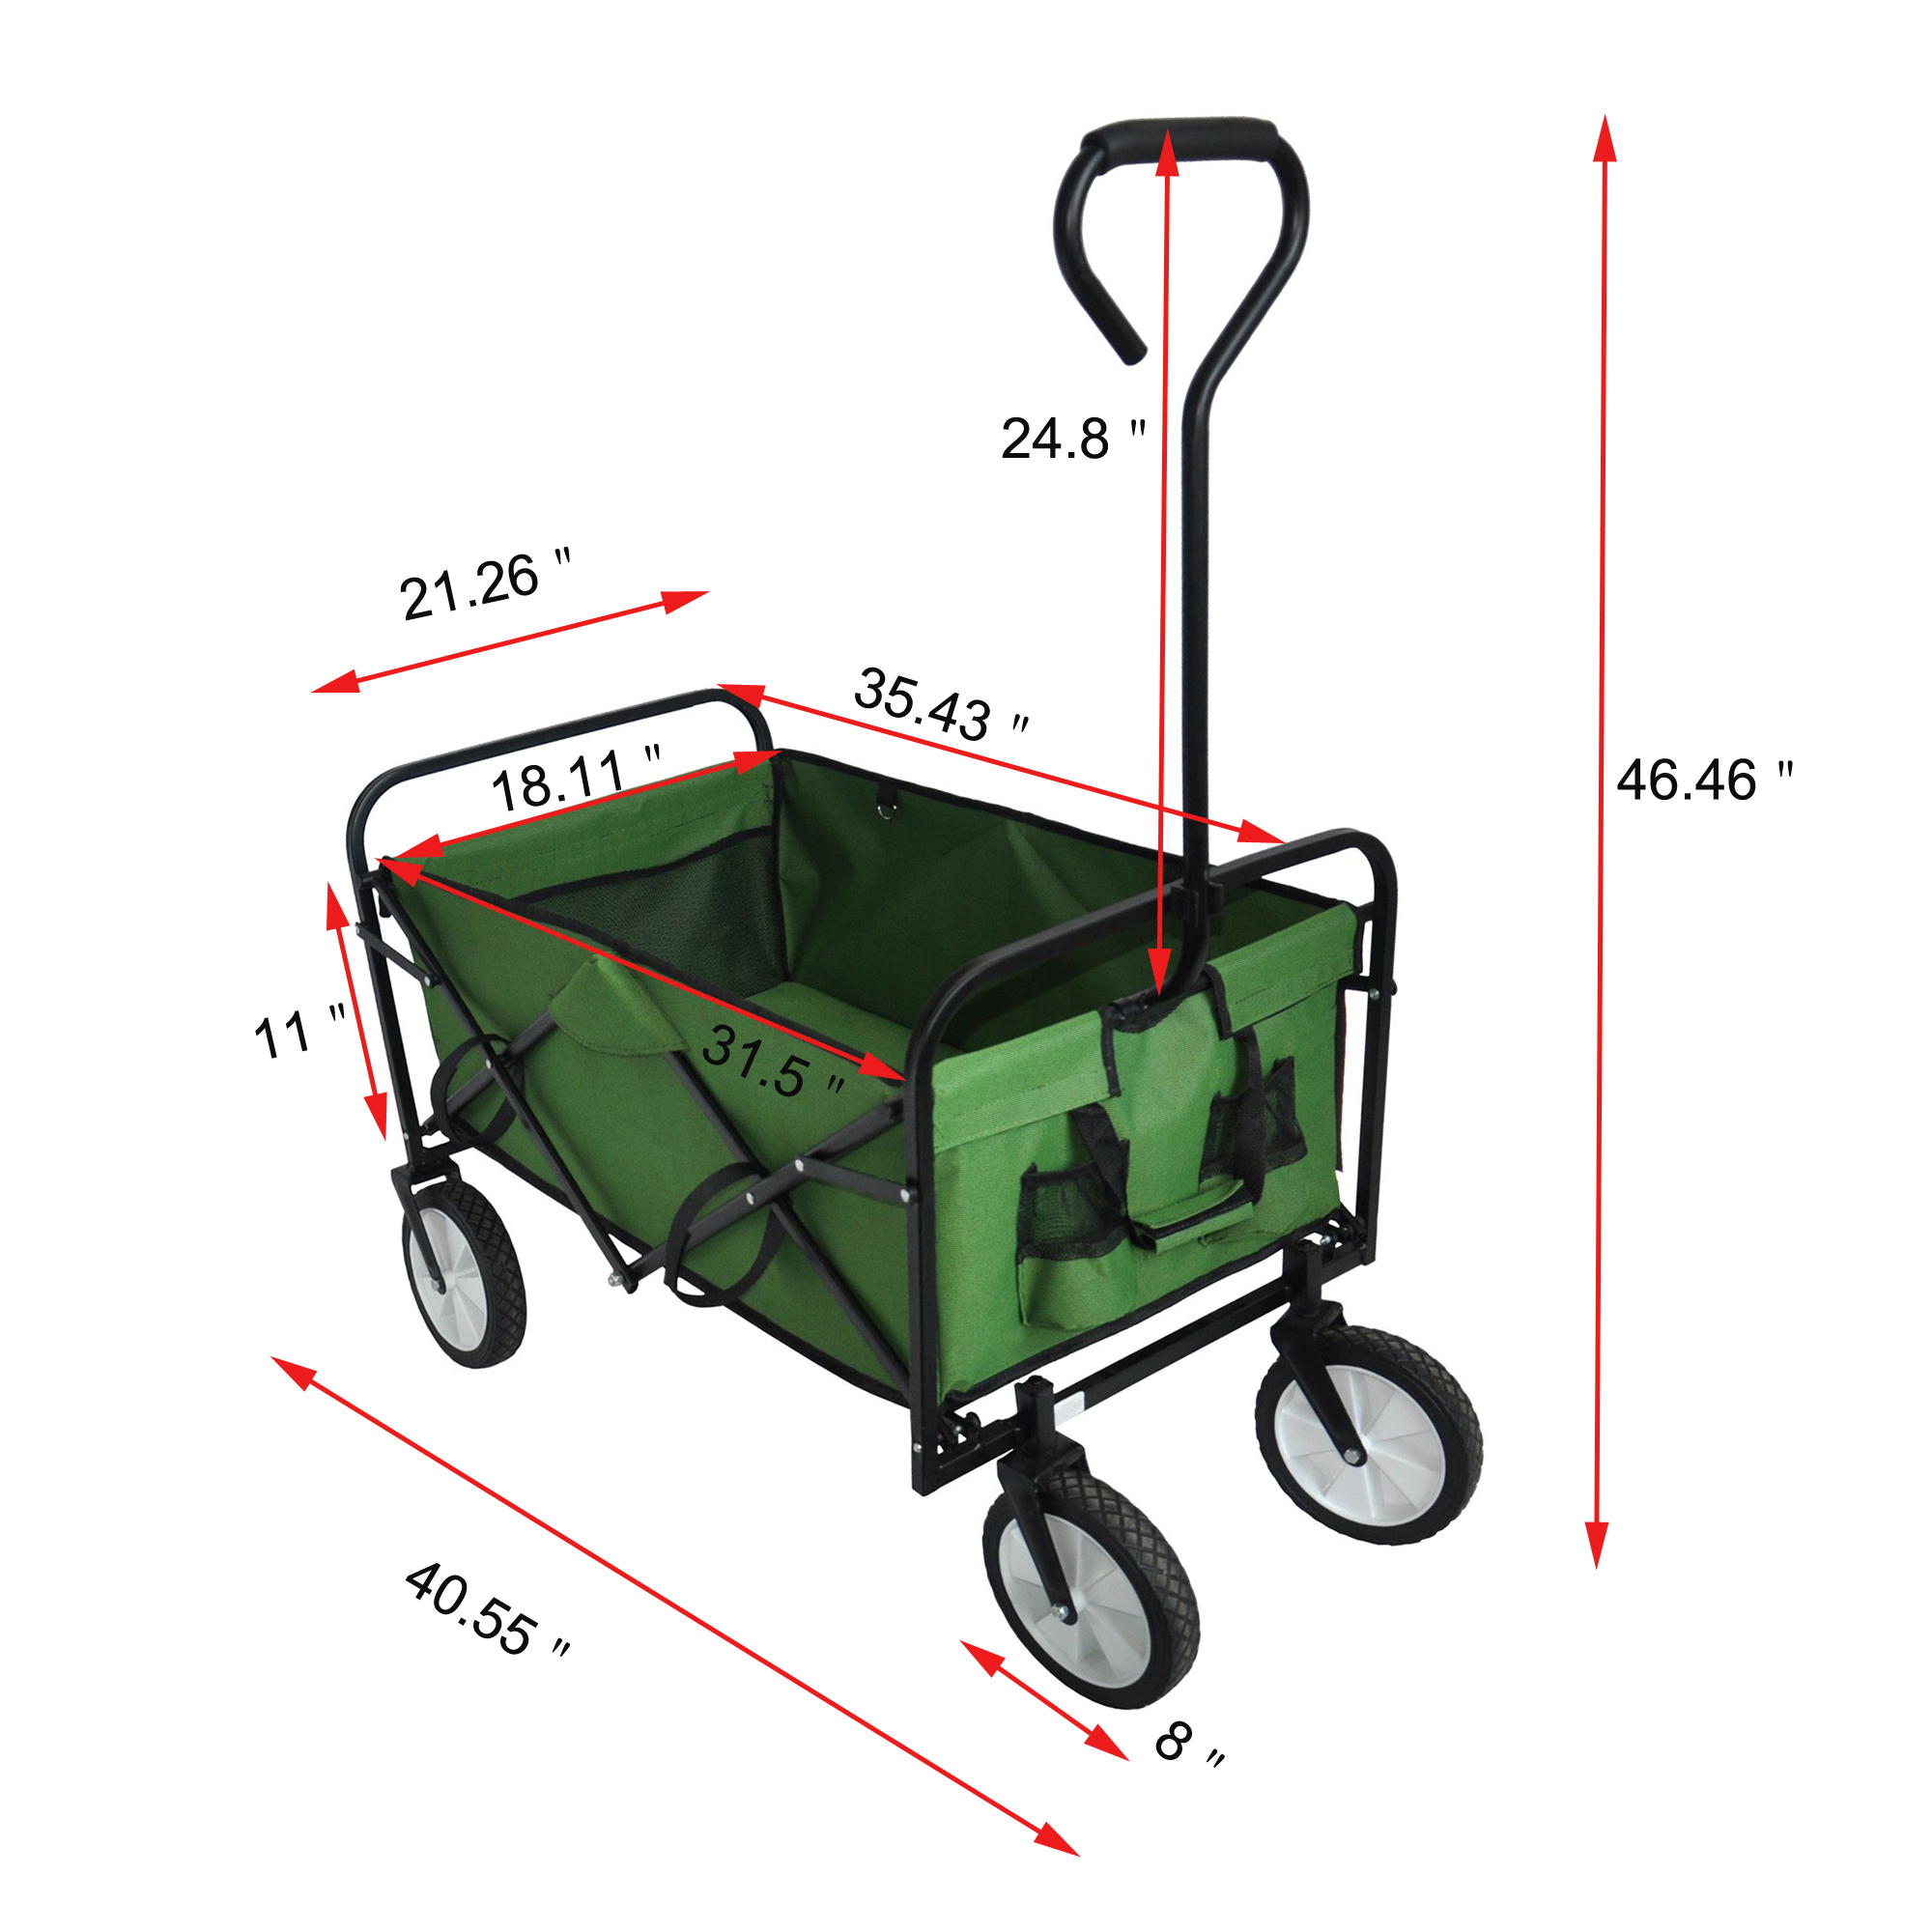 Beach Wagons with Big Wheels for Sand, Sturdy Steel Frame Collapsible Wagon, Foldable Wagon, Grocery Wagon with 3 Side Storage Bags, 2 Mesh Cup Holders, Elastic Rope, Adjustable Handle, Green, Q3808 - image 4 of 12